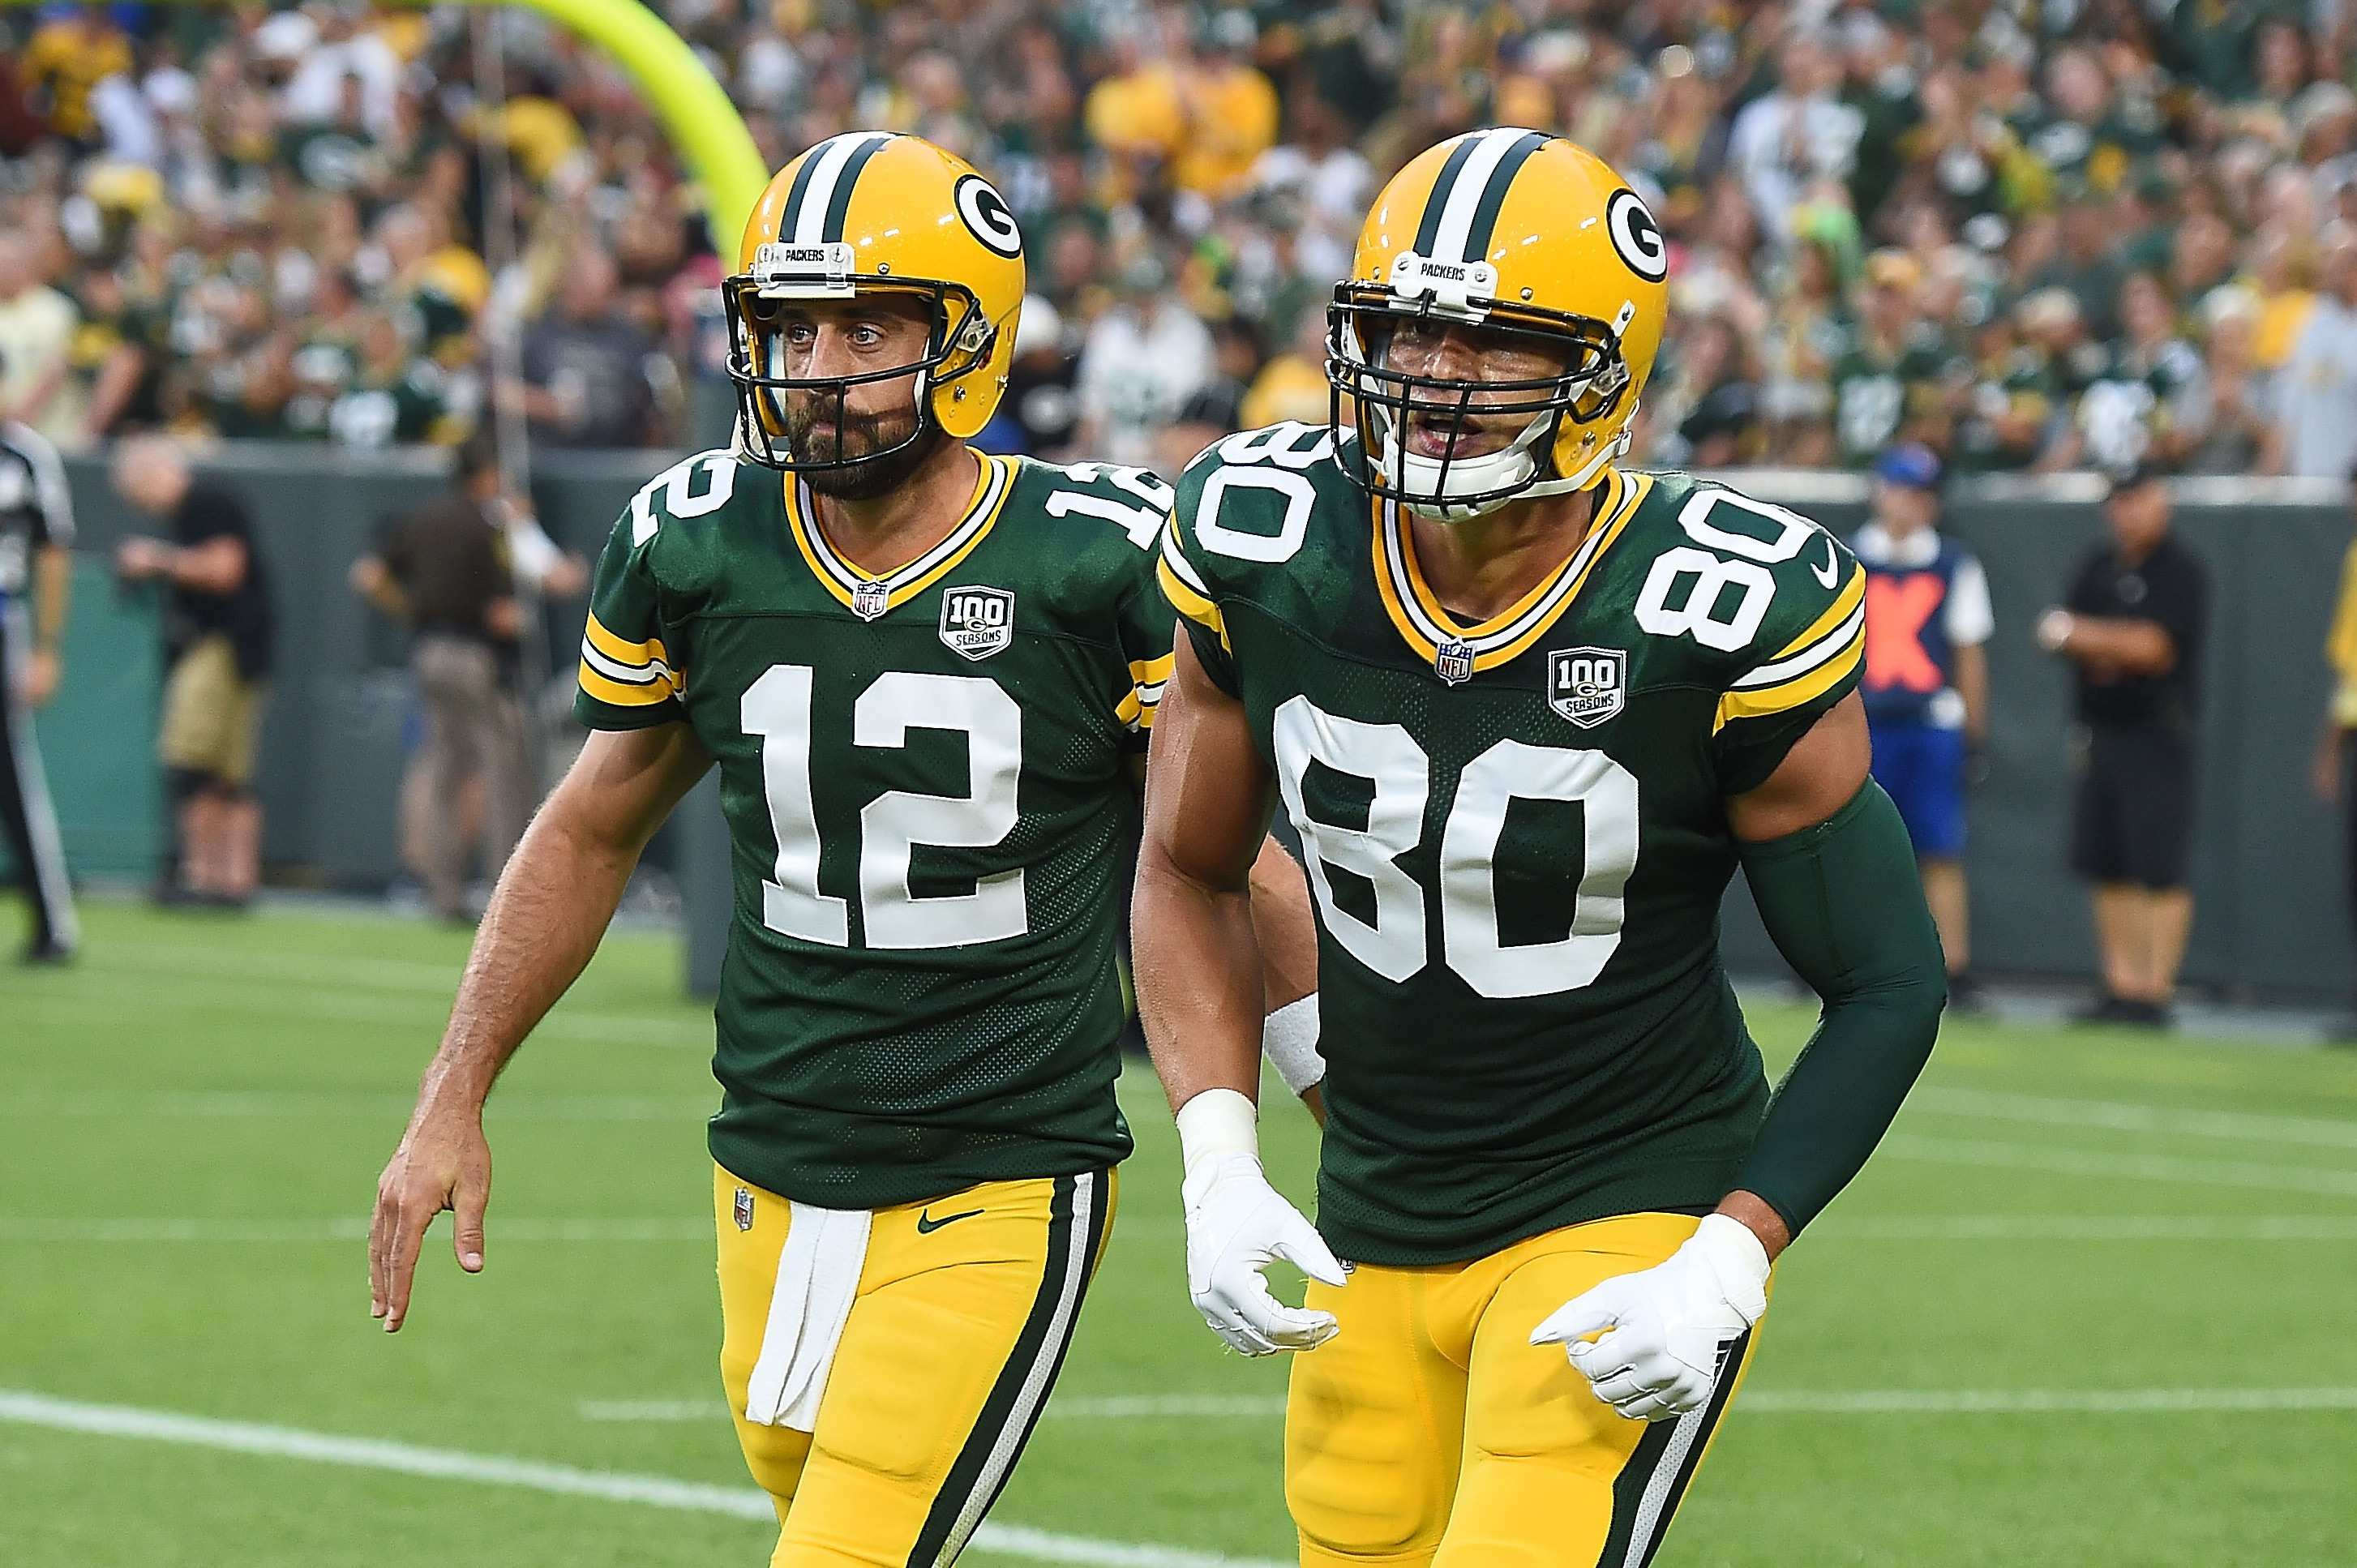 Prisco's Week 1 NFL picks: Bills spoil Aaron Rodgers' debut with Jets;  Packers, Steelers pull off upsets 